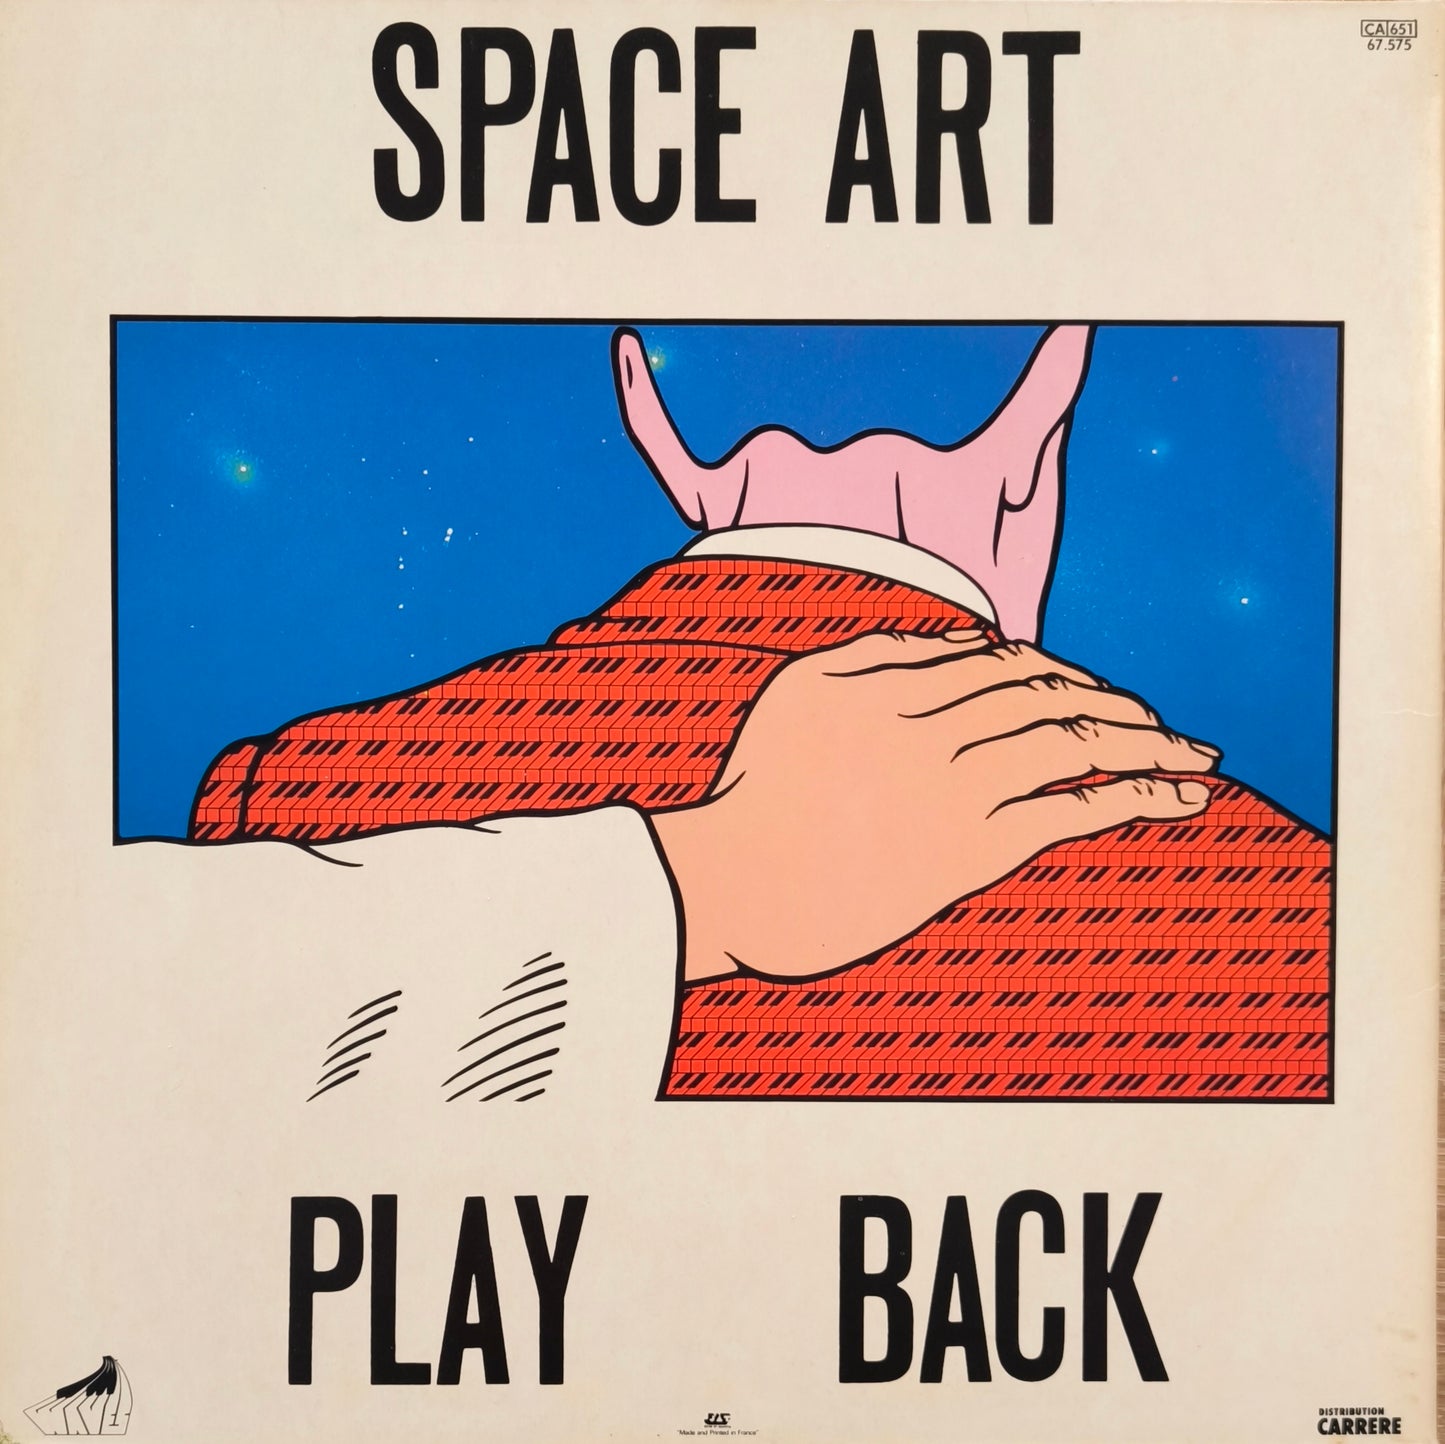 SPACE ART - Play Back